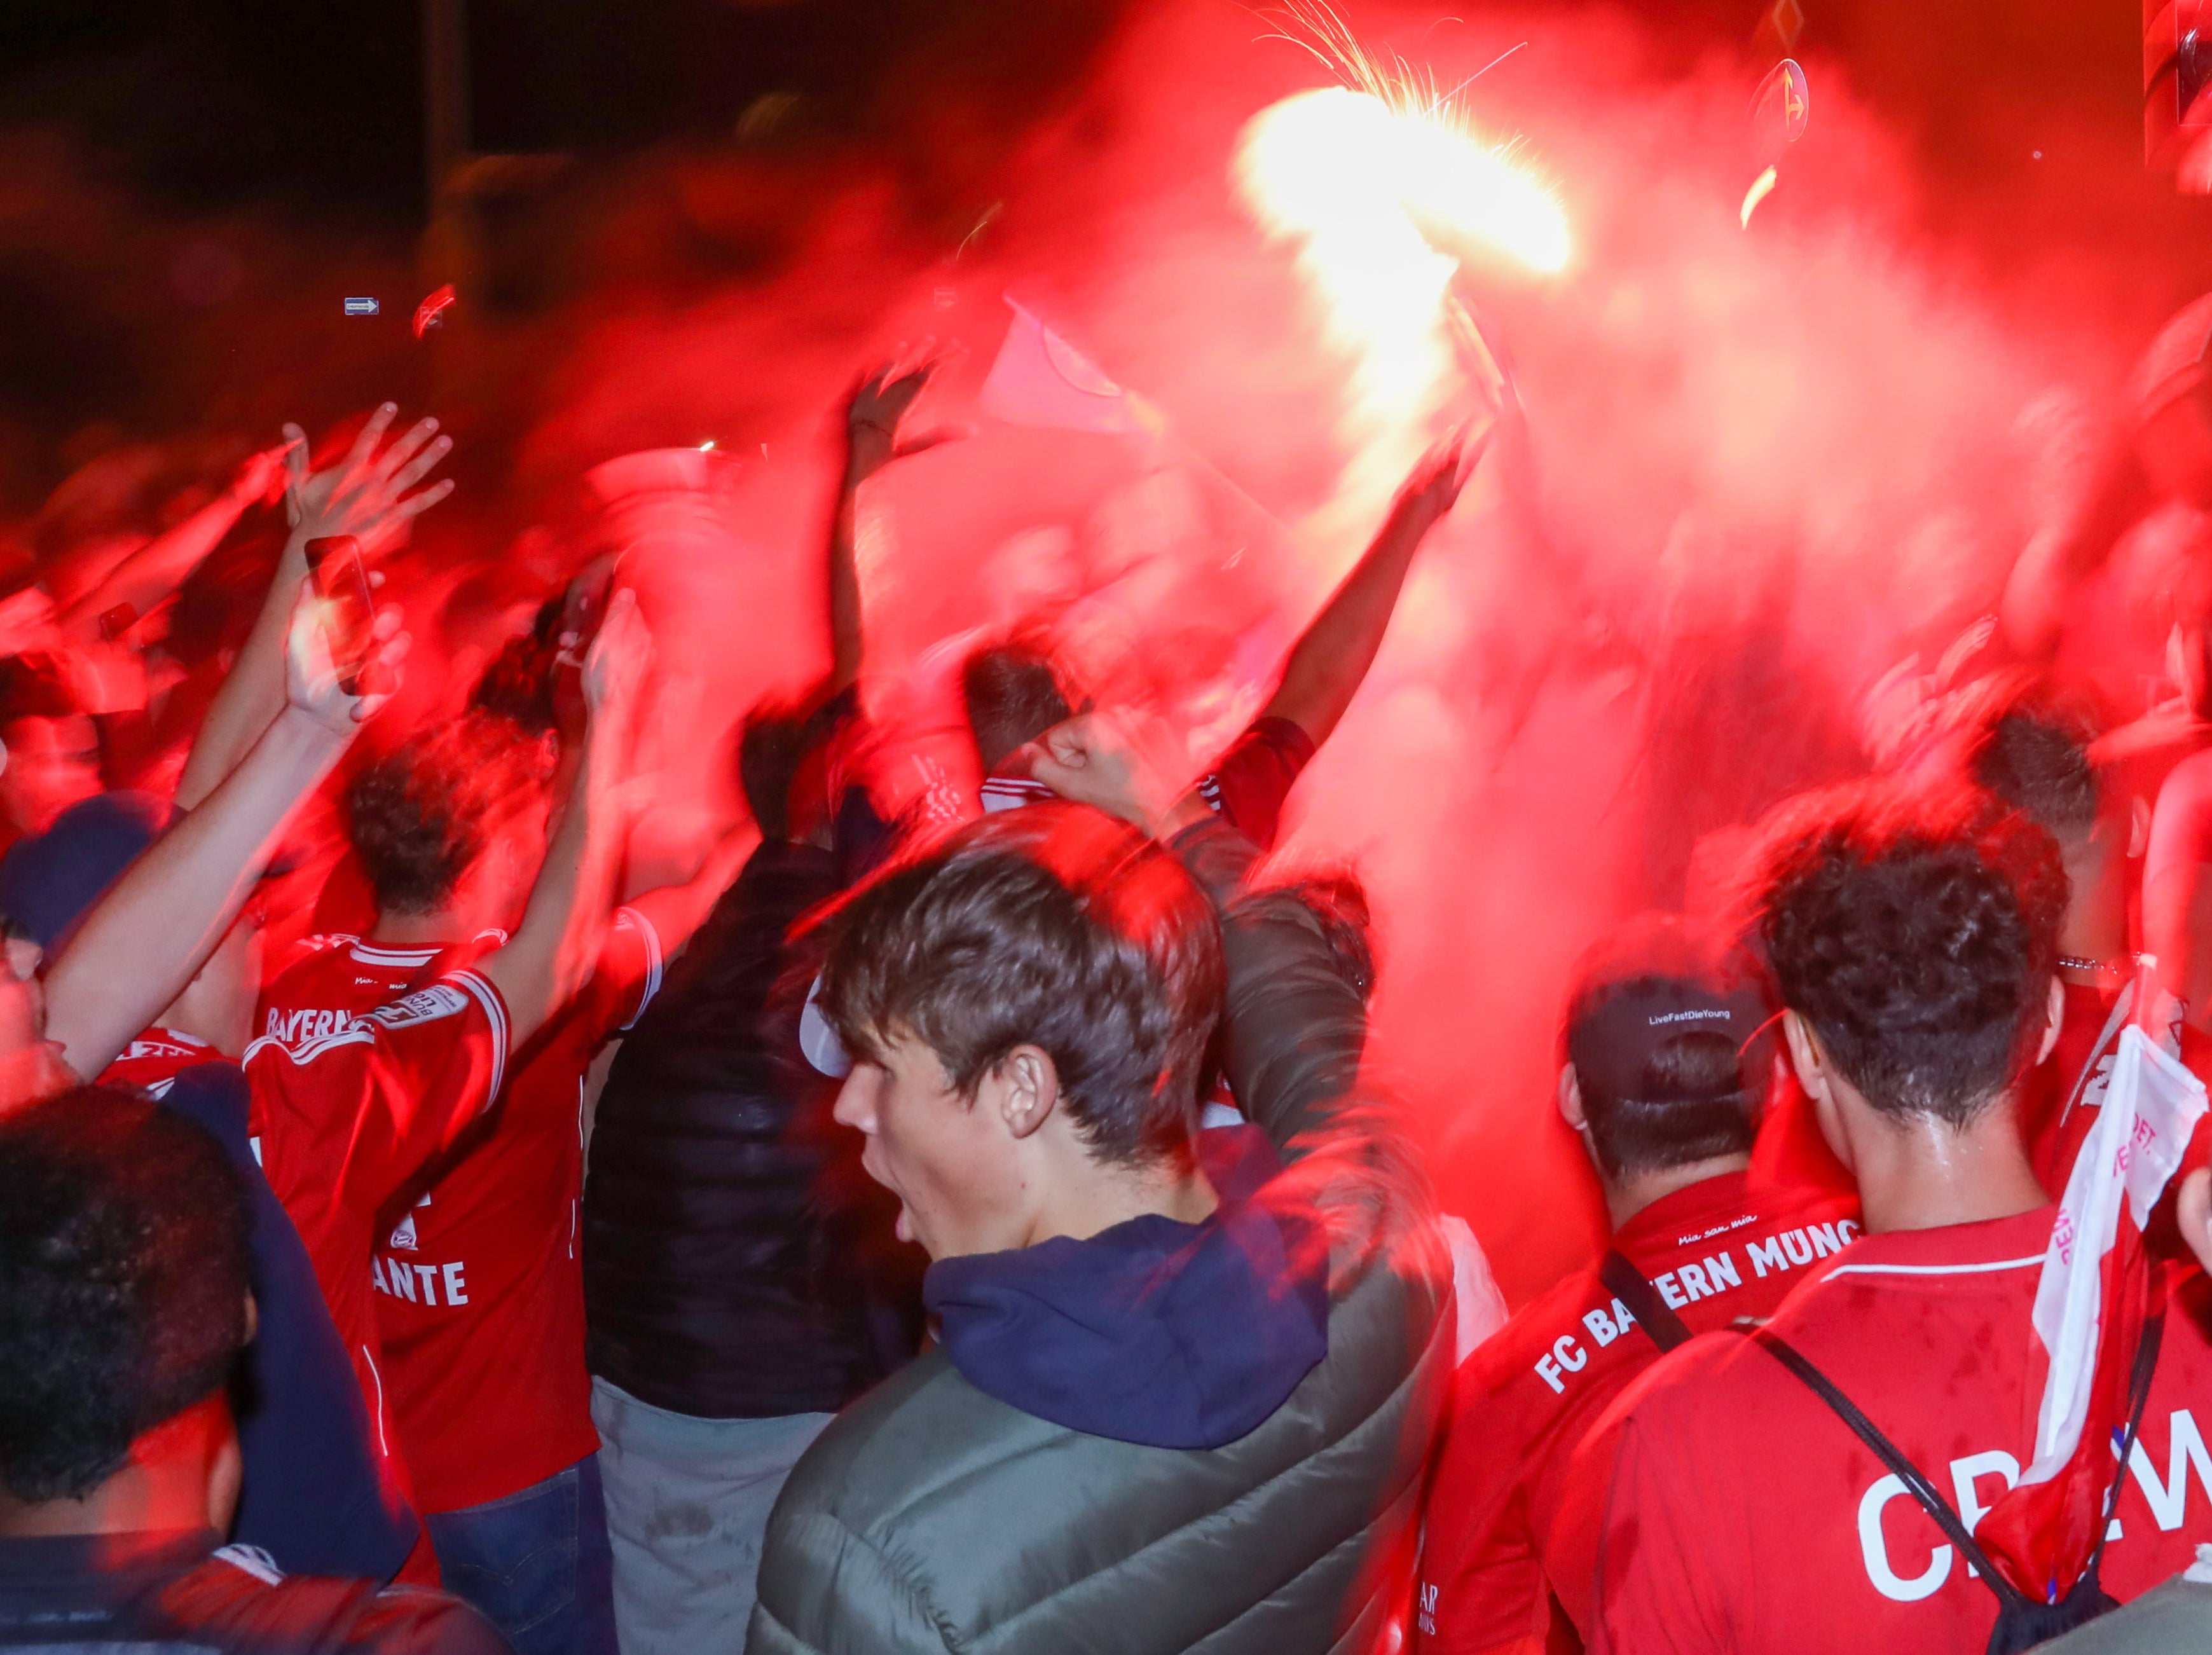 Bayern Munich fans celebrating their side's Champions League victory